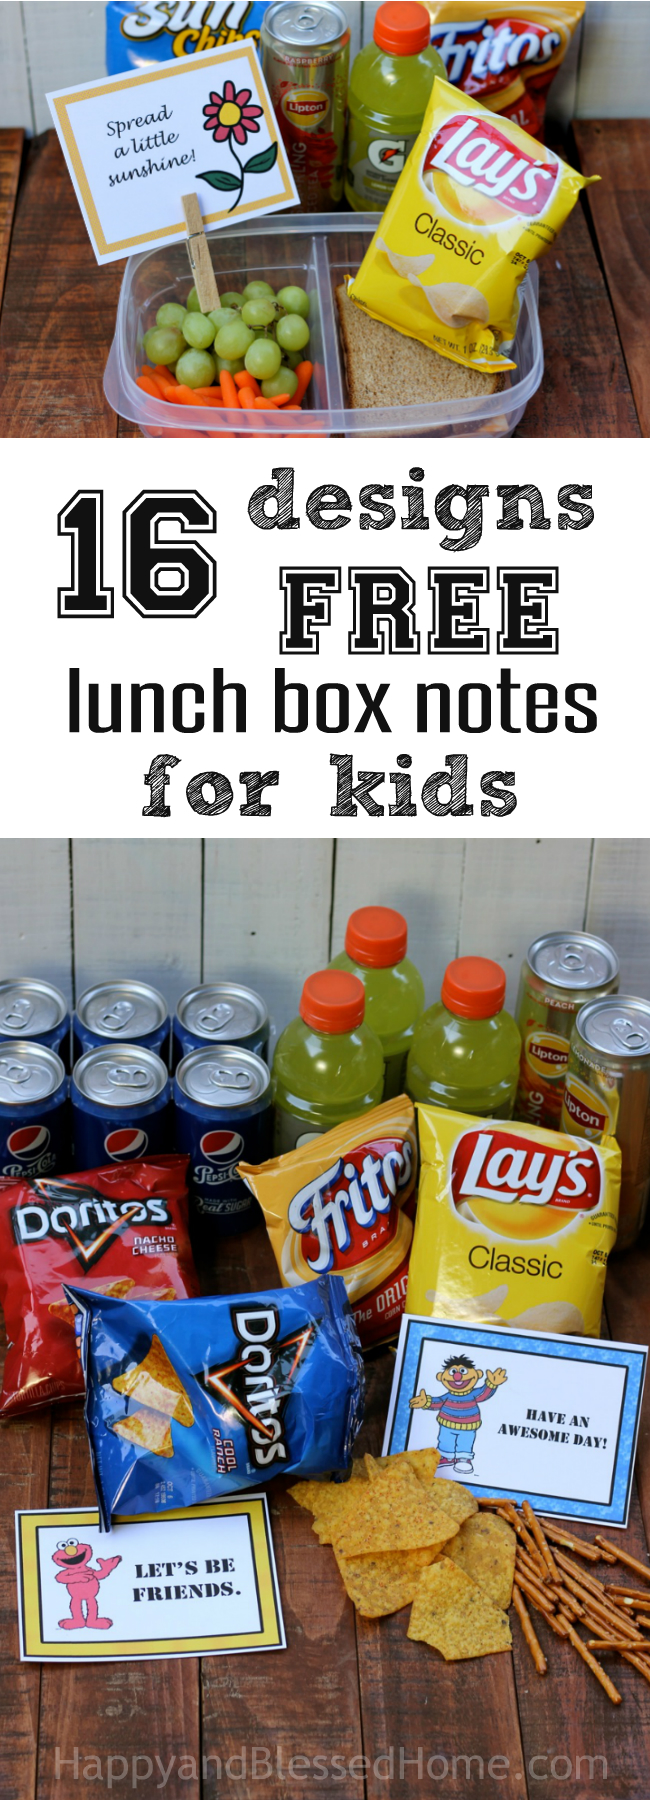 16 Designs FREE Lunch Box Notes for Kids with snacking tips from HappyandBlessedHome.com